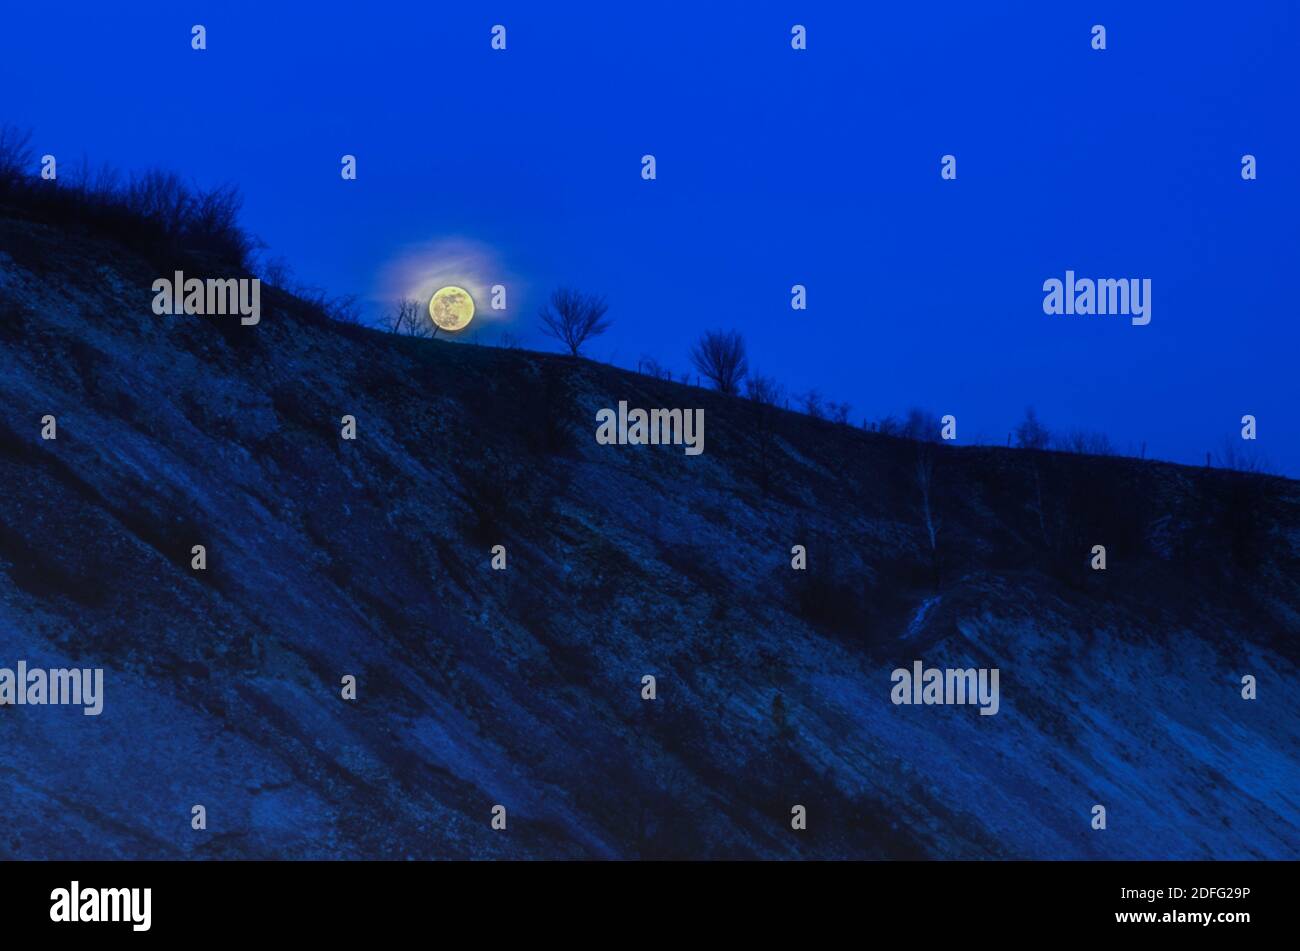 full moon rises at cold winter landscape at blue hour Stock Photo